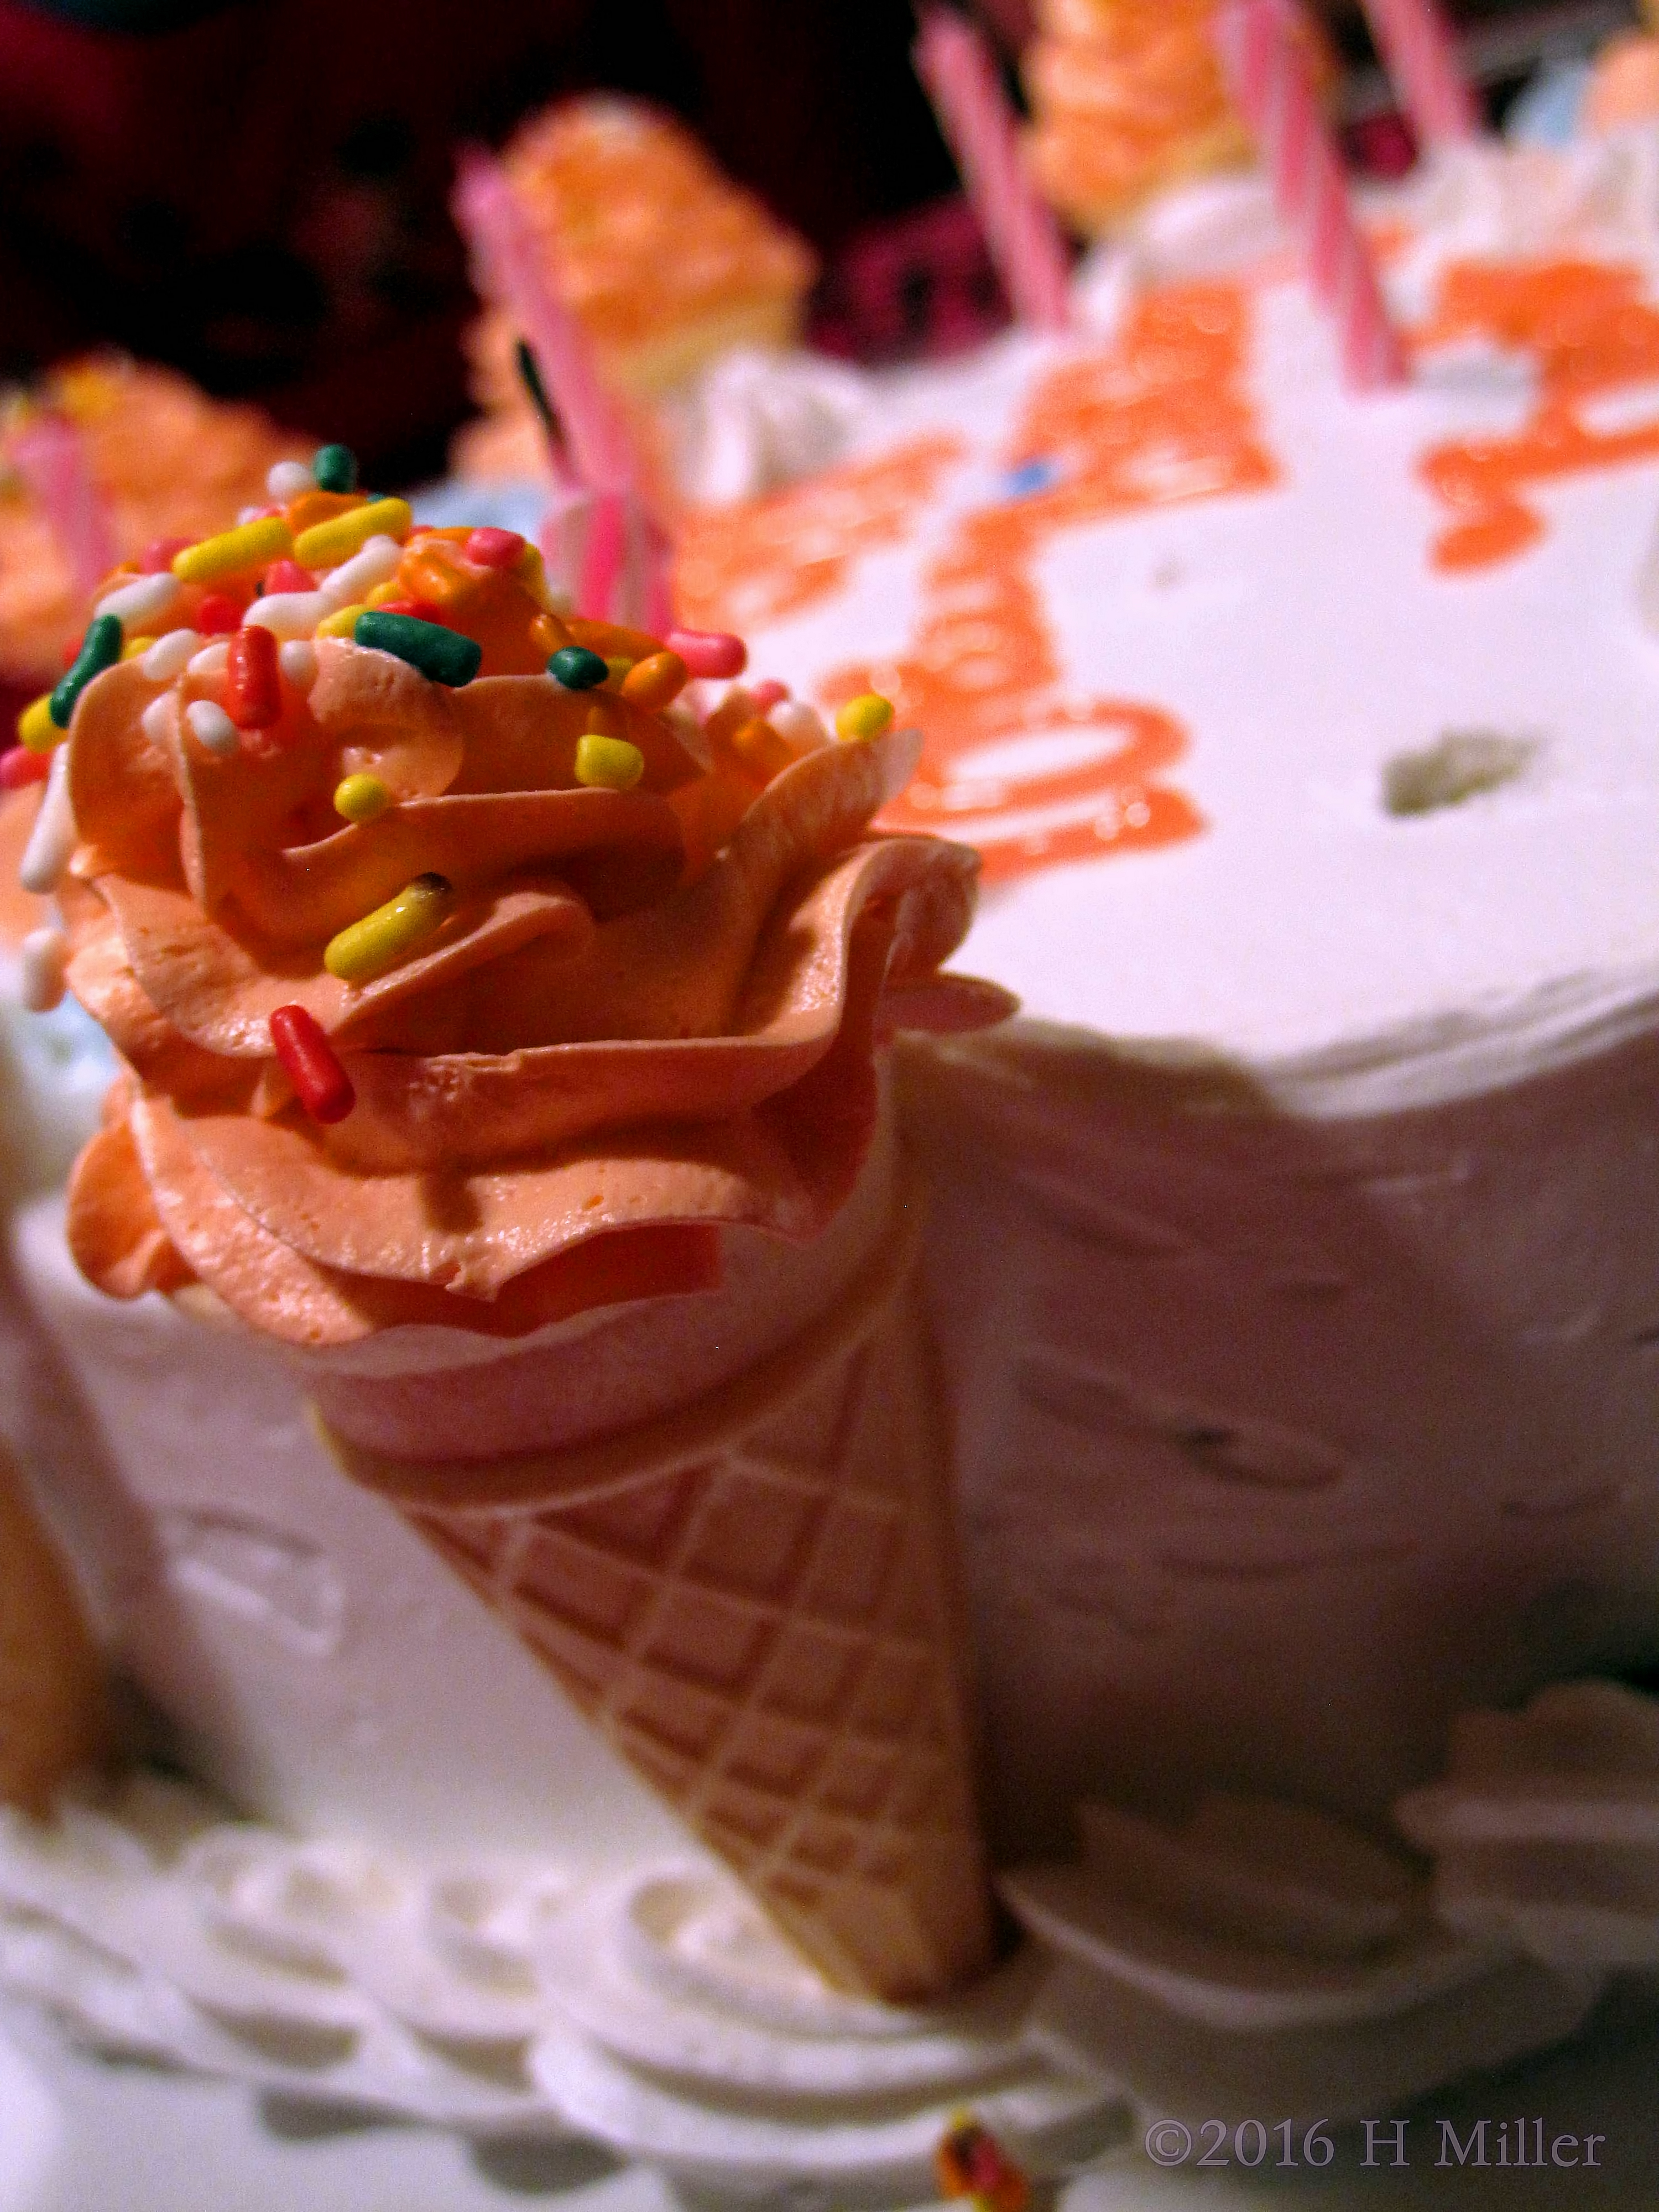 The Delicious Birthday Cake Surrounded By Even Tastier Ice Cream Cones! 